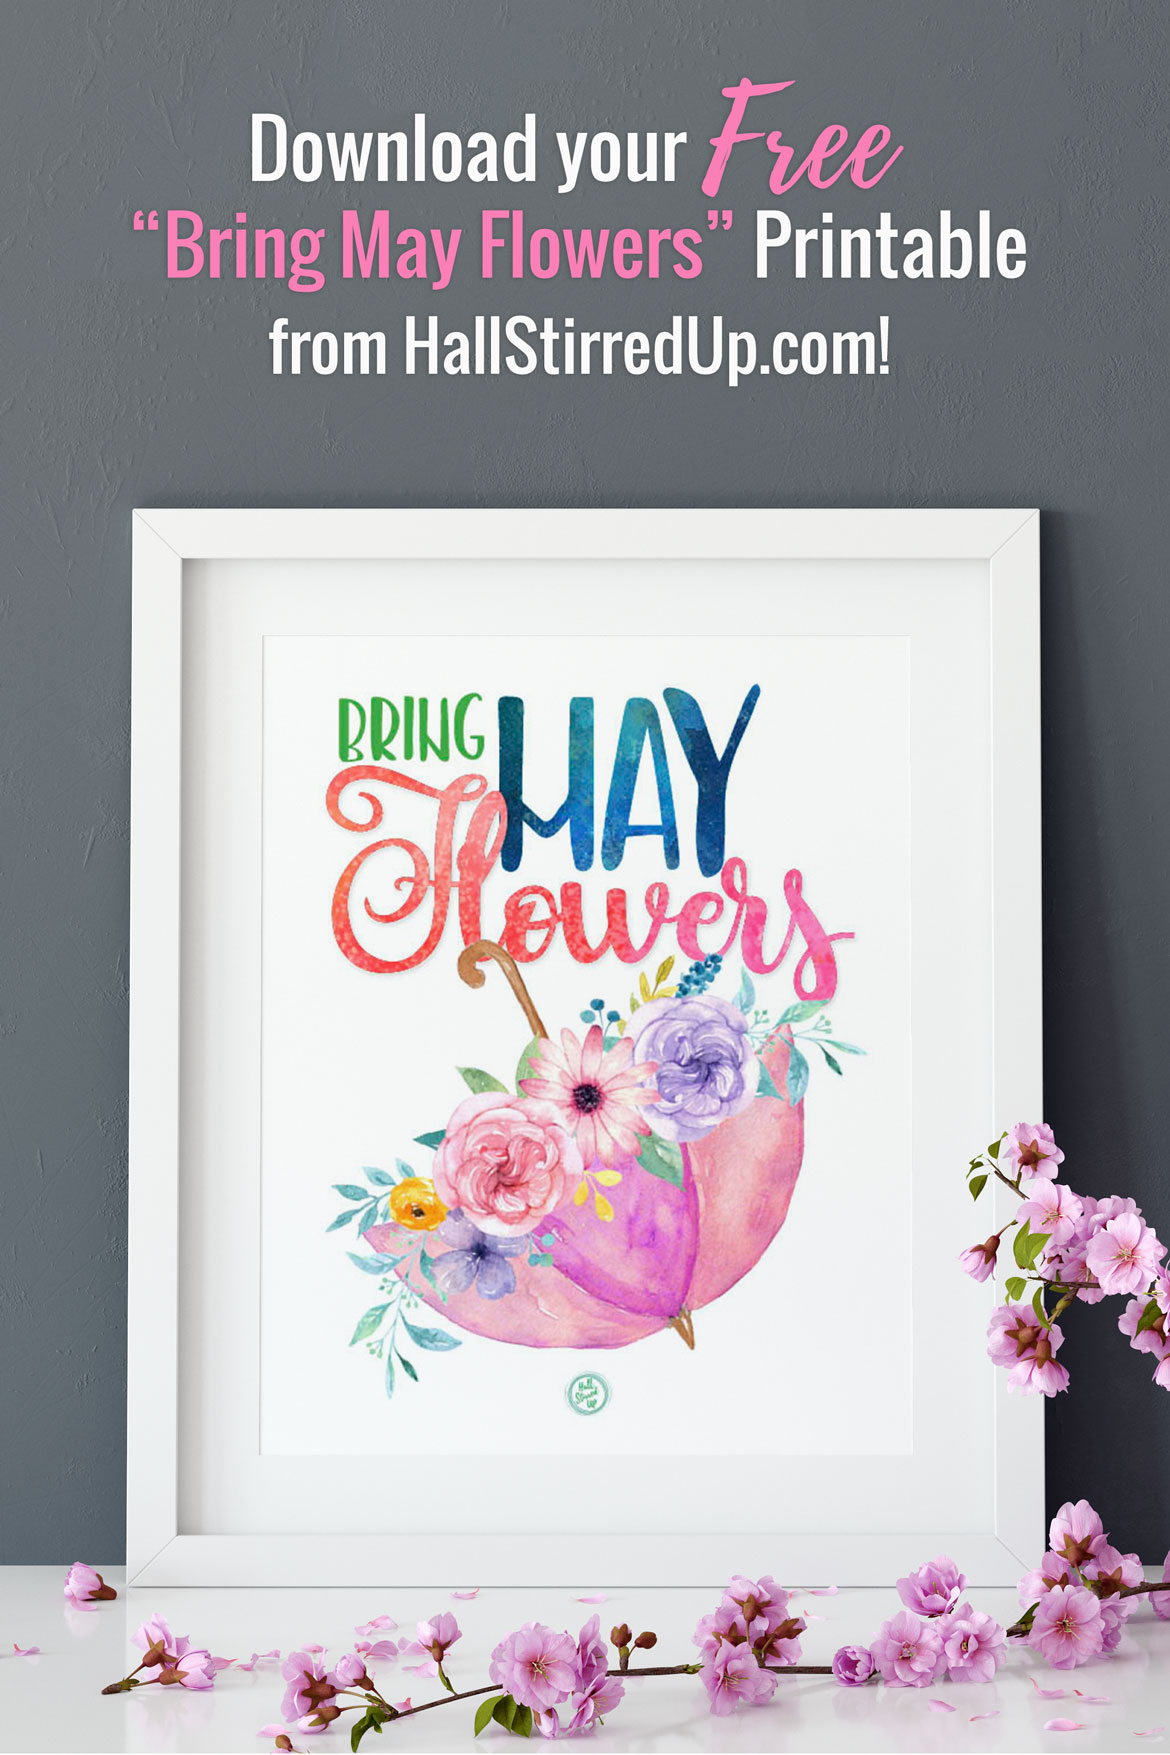 It's time for May flowers Includes printable